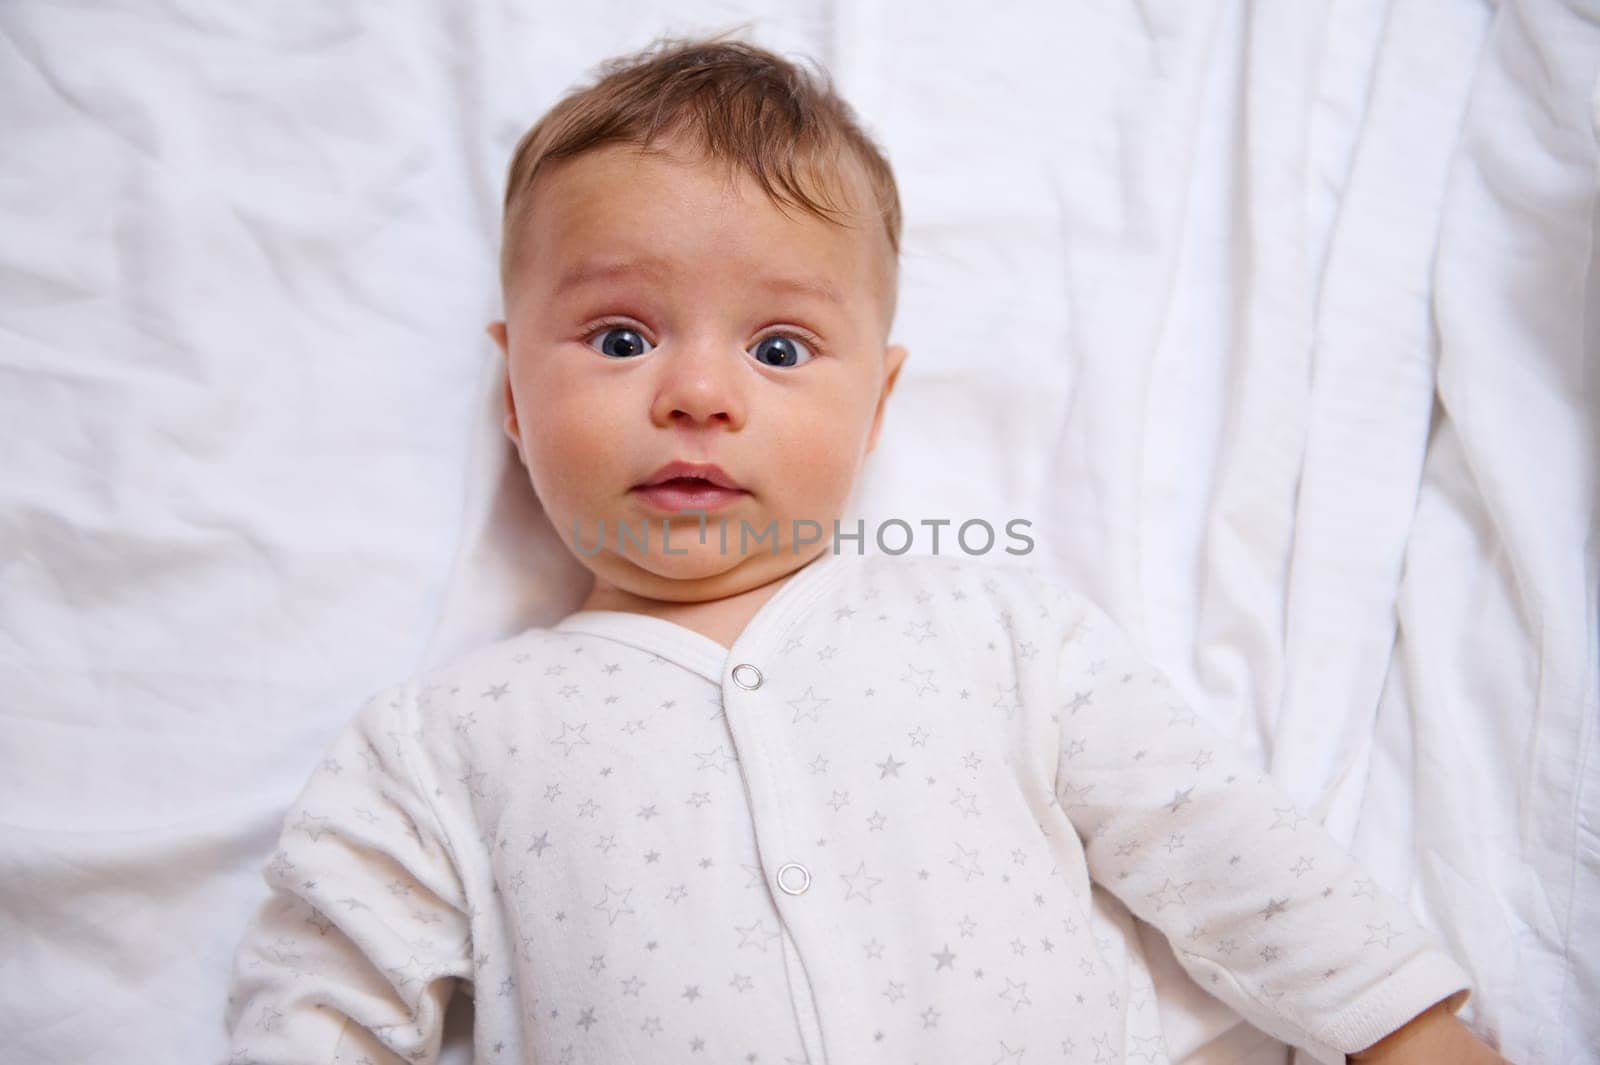 Close-up face portrait of Caucasian adorable lovely beautiful cute baby boy 4-6 months old looking at camera, lying on white bed sheets on the bed. Copy advertising space. Beautiful kids. Baby care